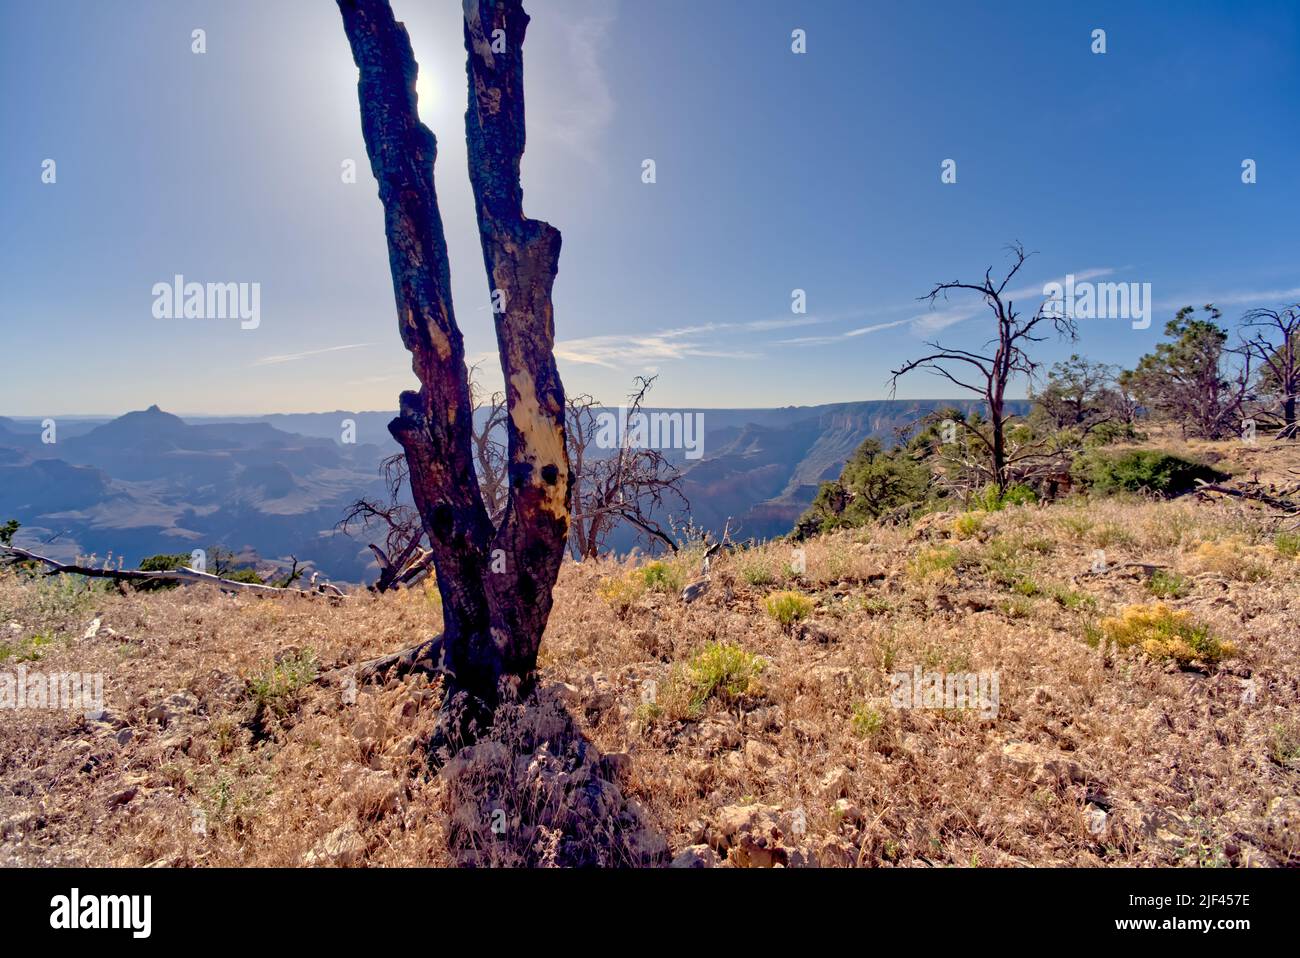 Severely charred tree in a forest east of Shoshone Point that was burned many years ago from a forest fire at Grand Canyon Arizona. Stock Photo